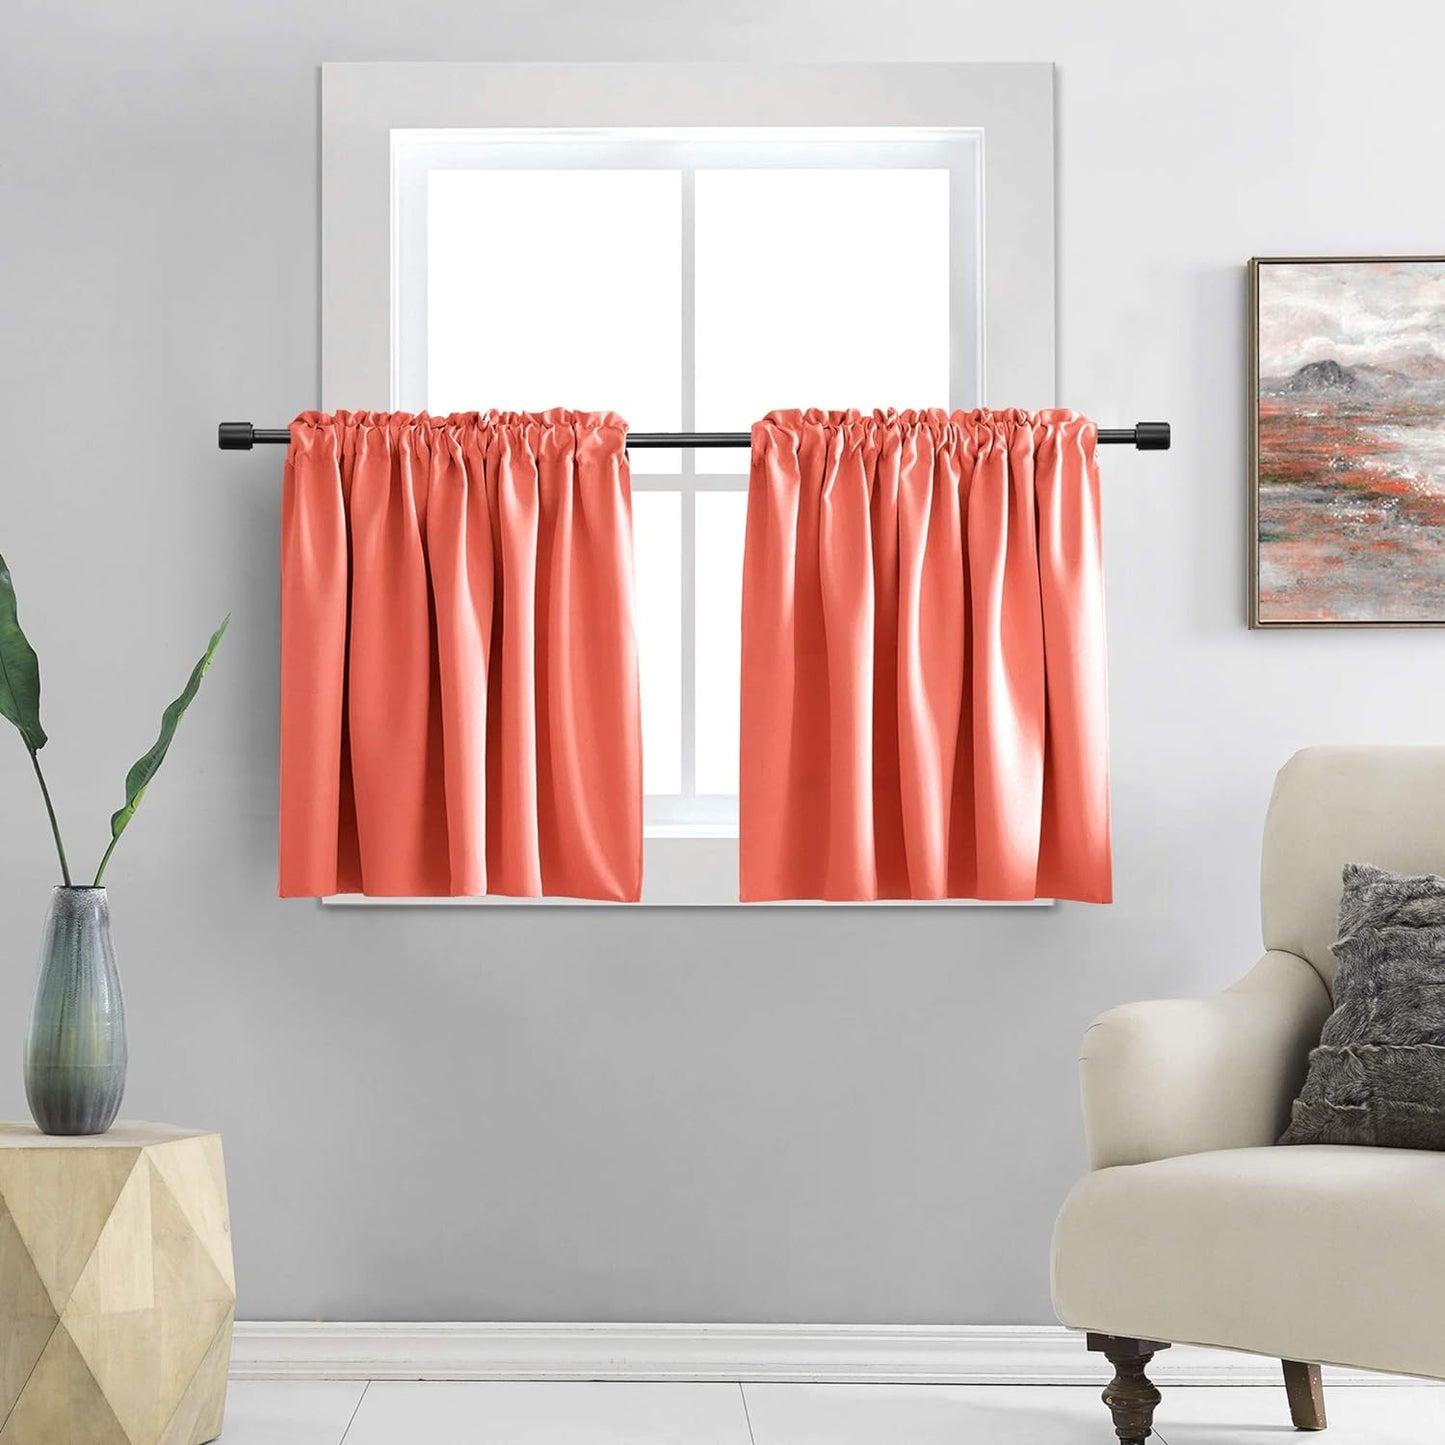 DONREN 24 Inch Length Curtains- 2 Panels Blackout Thermal Insulating Small Curtain Tiers for Bathroom with Rod Pocket (Black,42 Inch Width)  DONREN Coral 42" X 30" 